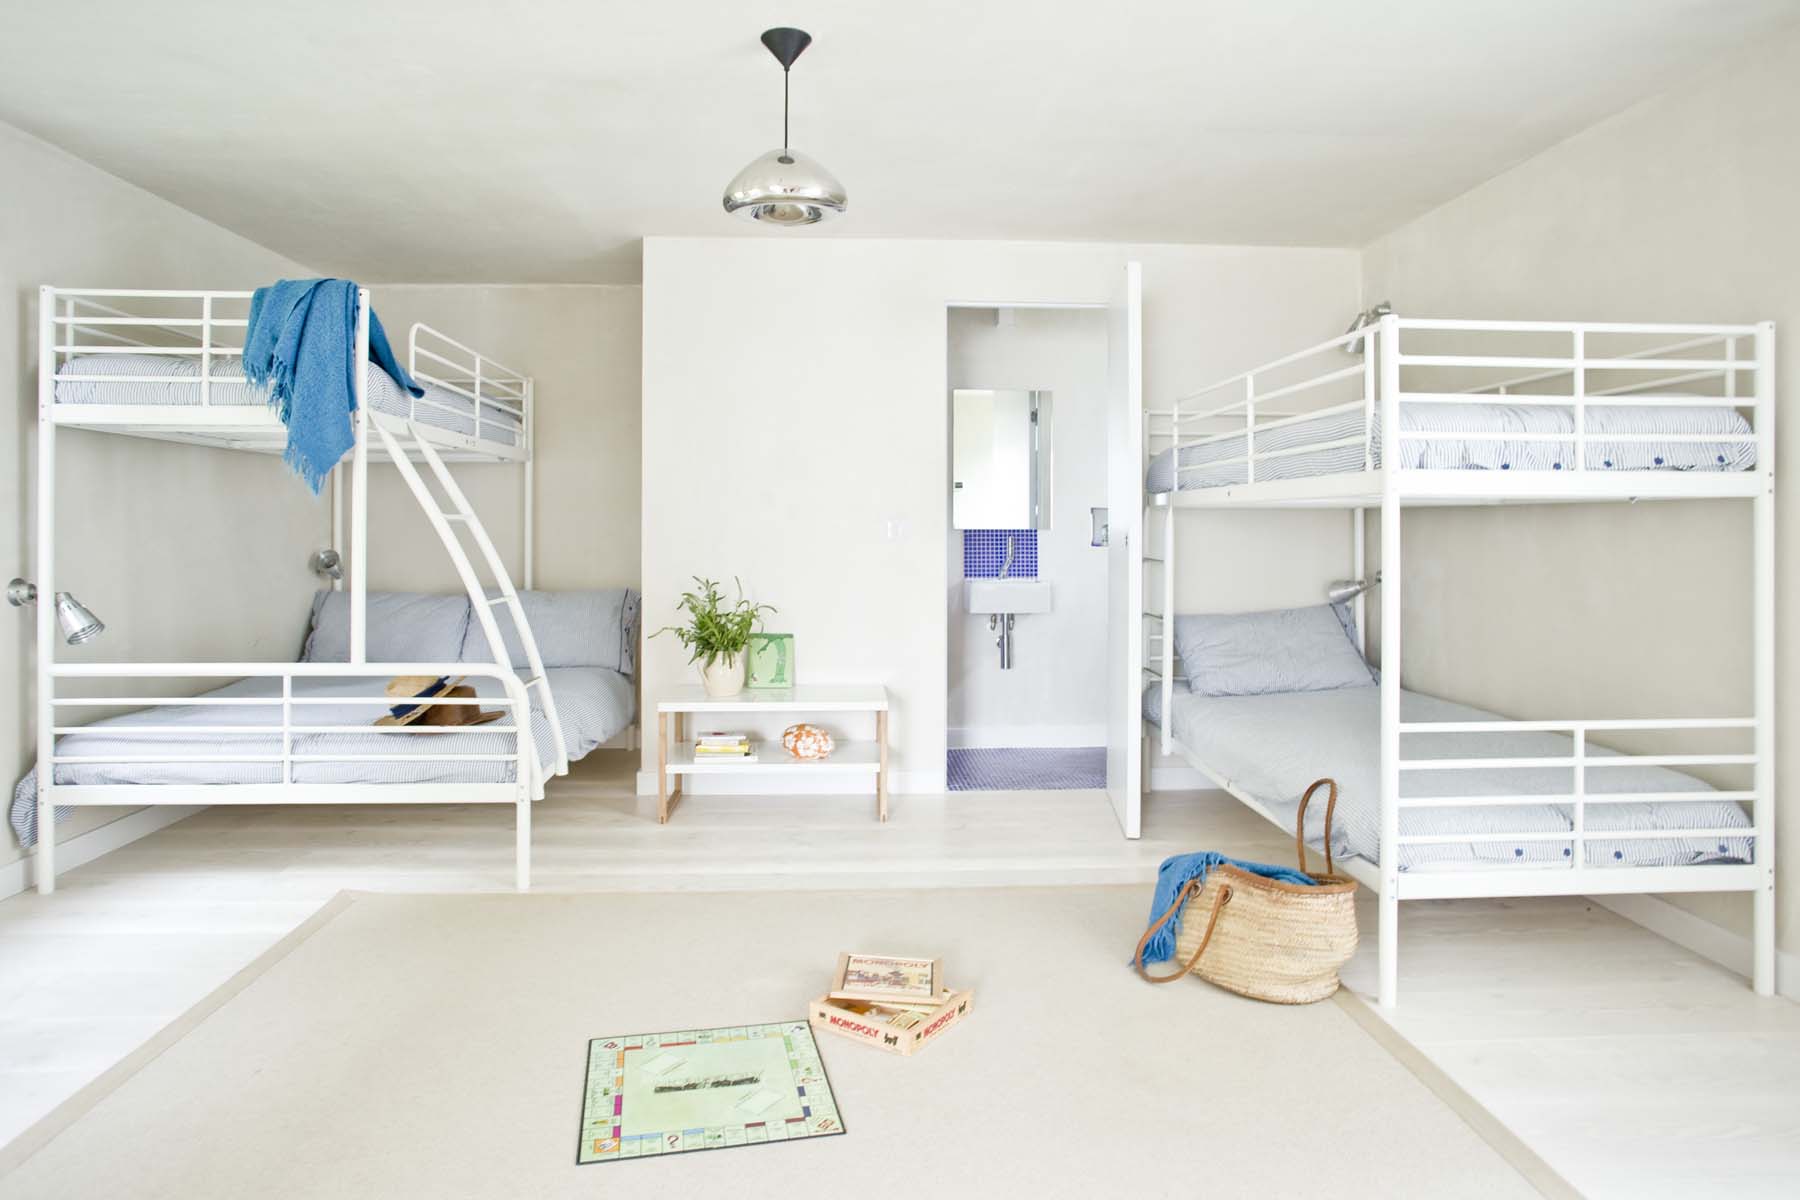 A modern kids room with bunk beds and games